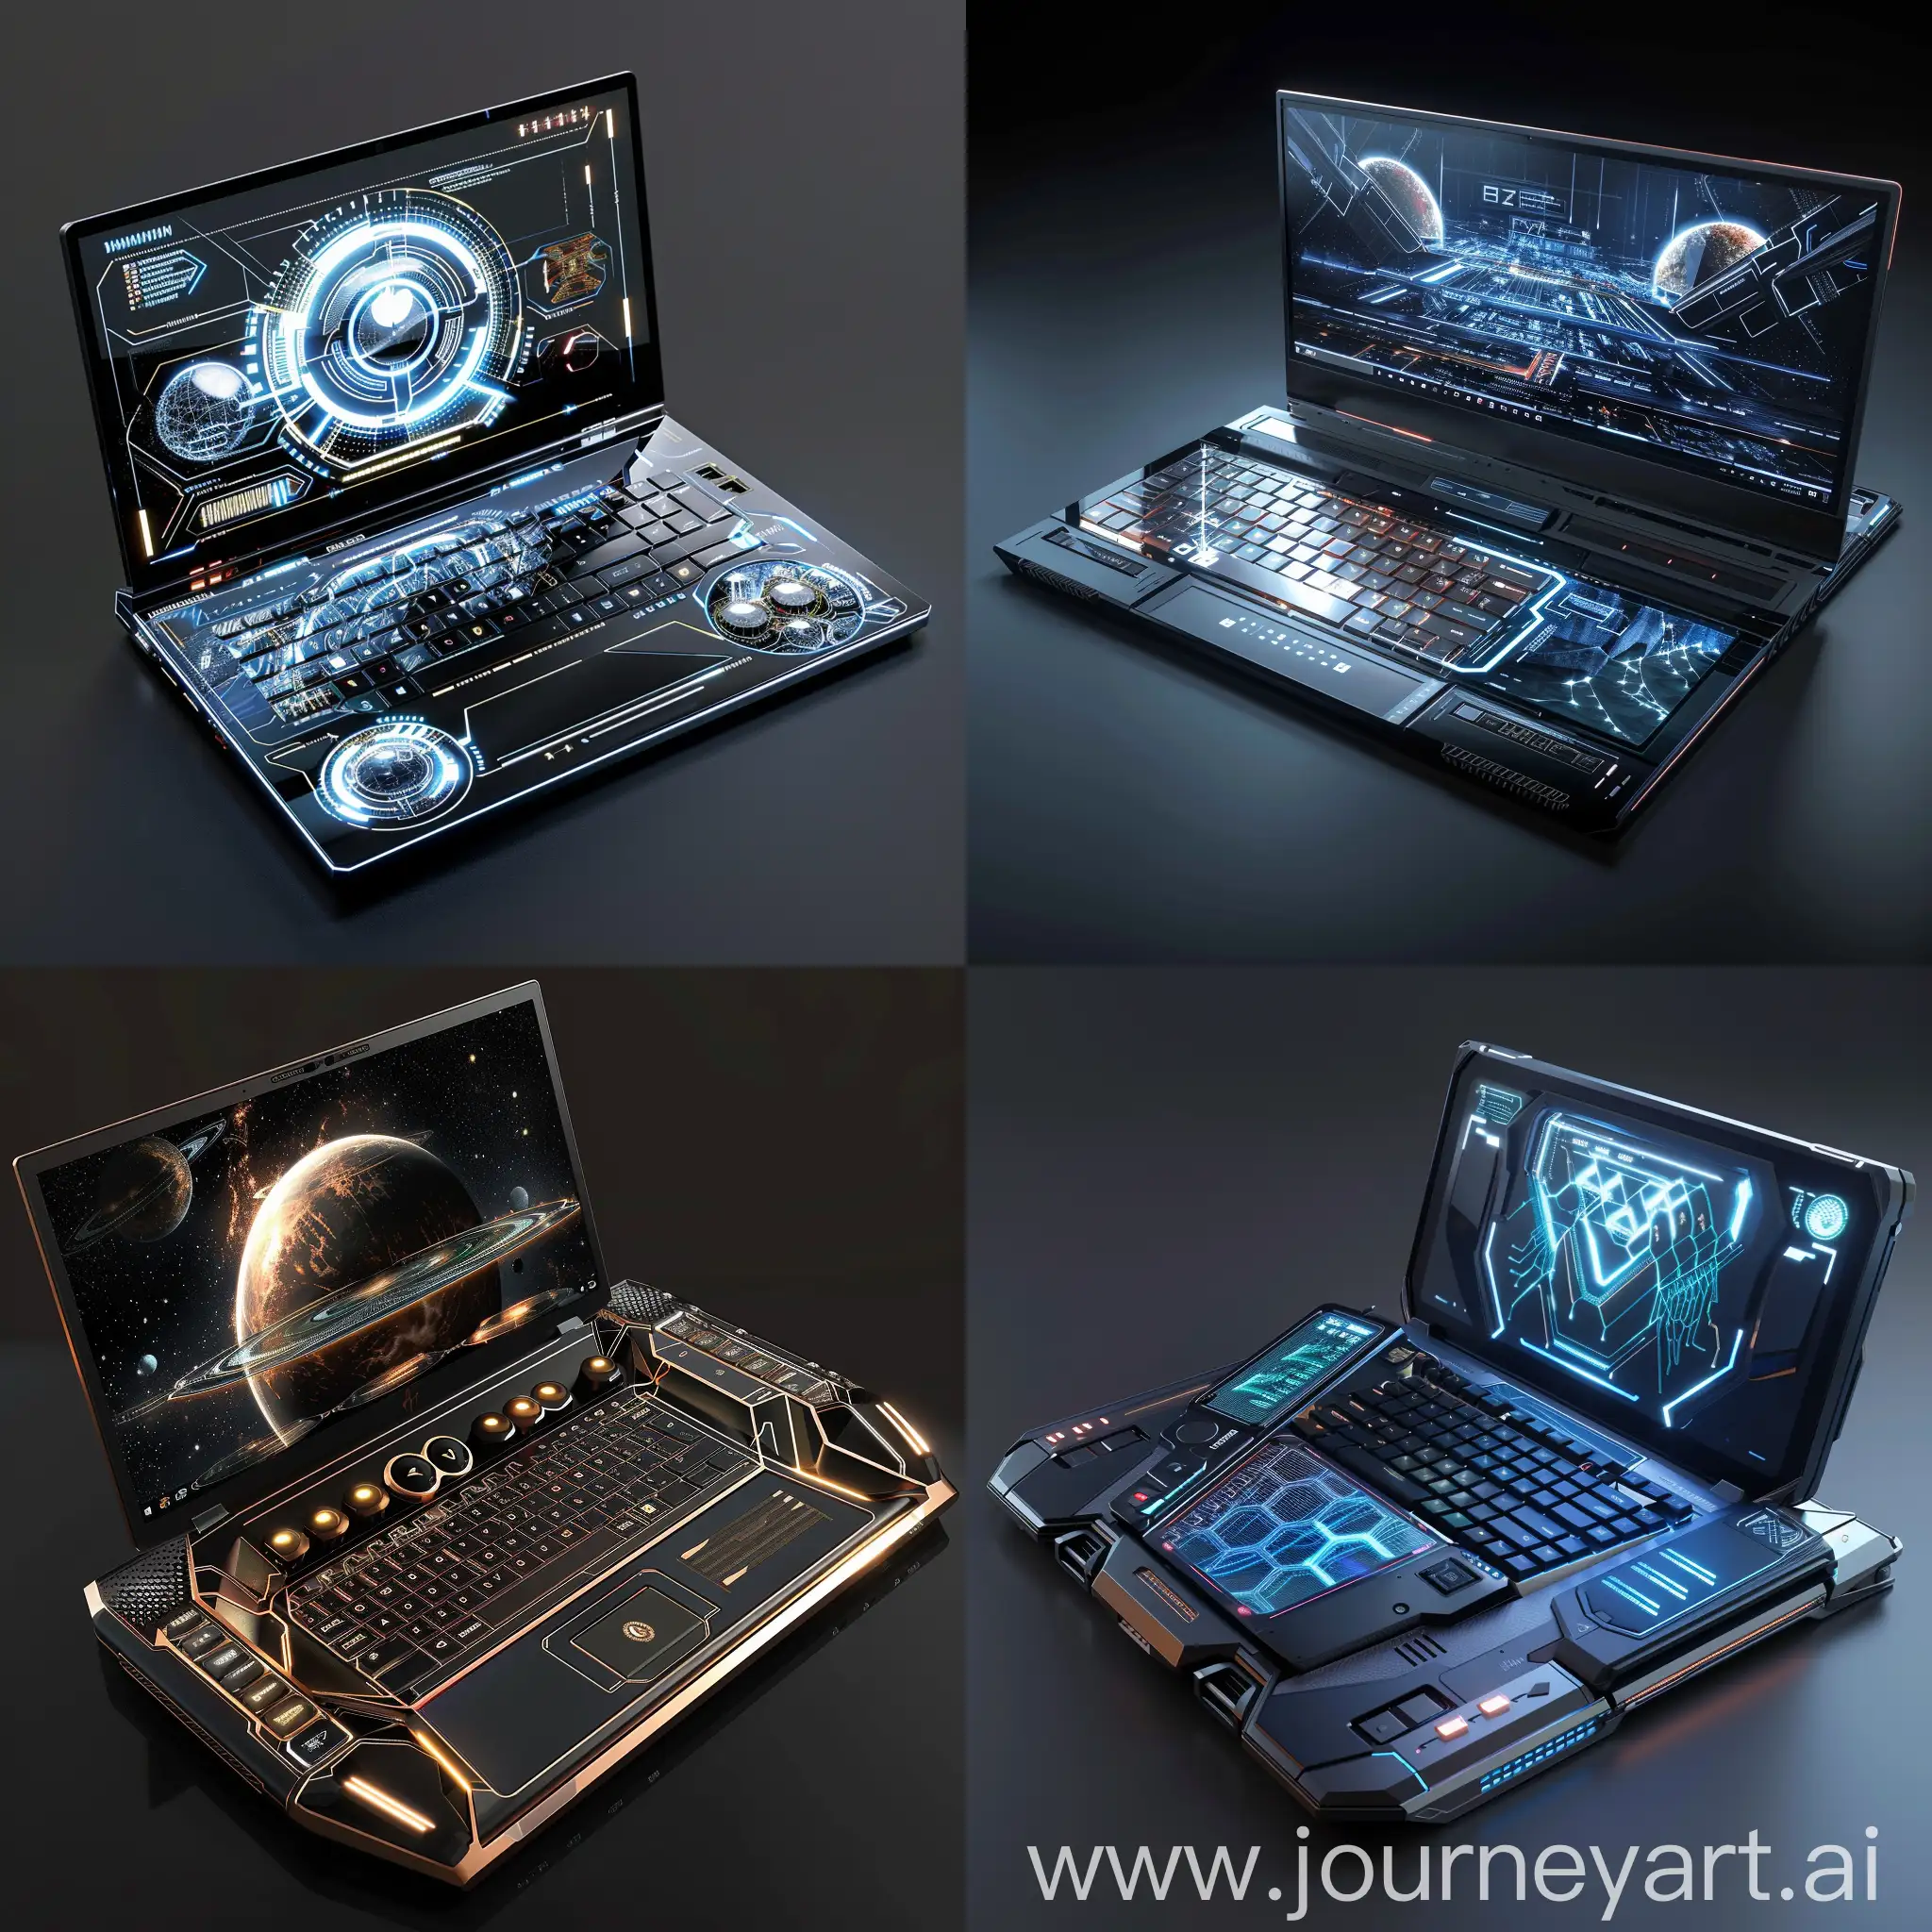 Sci-Fi laptop, Advanced Science and Technology, Advanced, Quantum Processor Chips, Graphene Batteries, Holographic Displays, Neural Interface Components, Molecular Memory Storage, Self-Healing Materials, Liquid Cooling Systems, Flexible and Foldable Screens, Voice-Controlled BIOS, AI Co-Processors, Solar-Powered Skins, Shape-Shifting Chassis, Seamless, Bezel-less Displays, Integrated IoT Connectivity, Cloud-Optimized Operating Systems, Decentralized Data Management, Cybersecurity Hardware, Content Creation Accelerators, Virtual Reality Ready Components, Adaptive Network Interfaces, In Unreal Engine 5 Style --stylize 1000